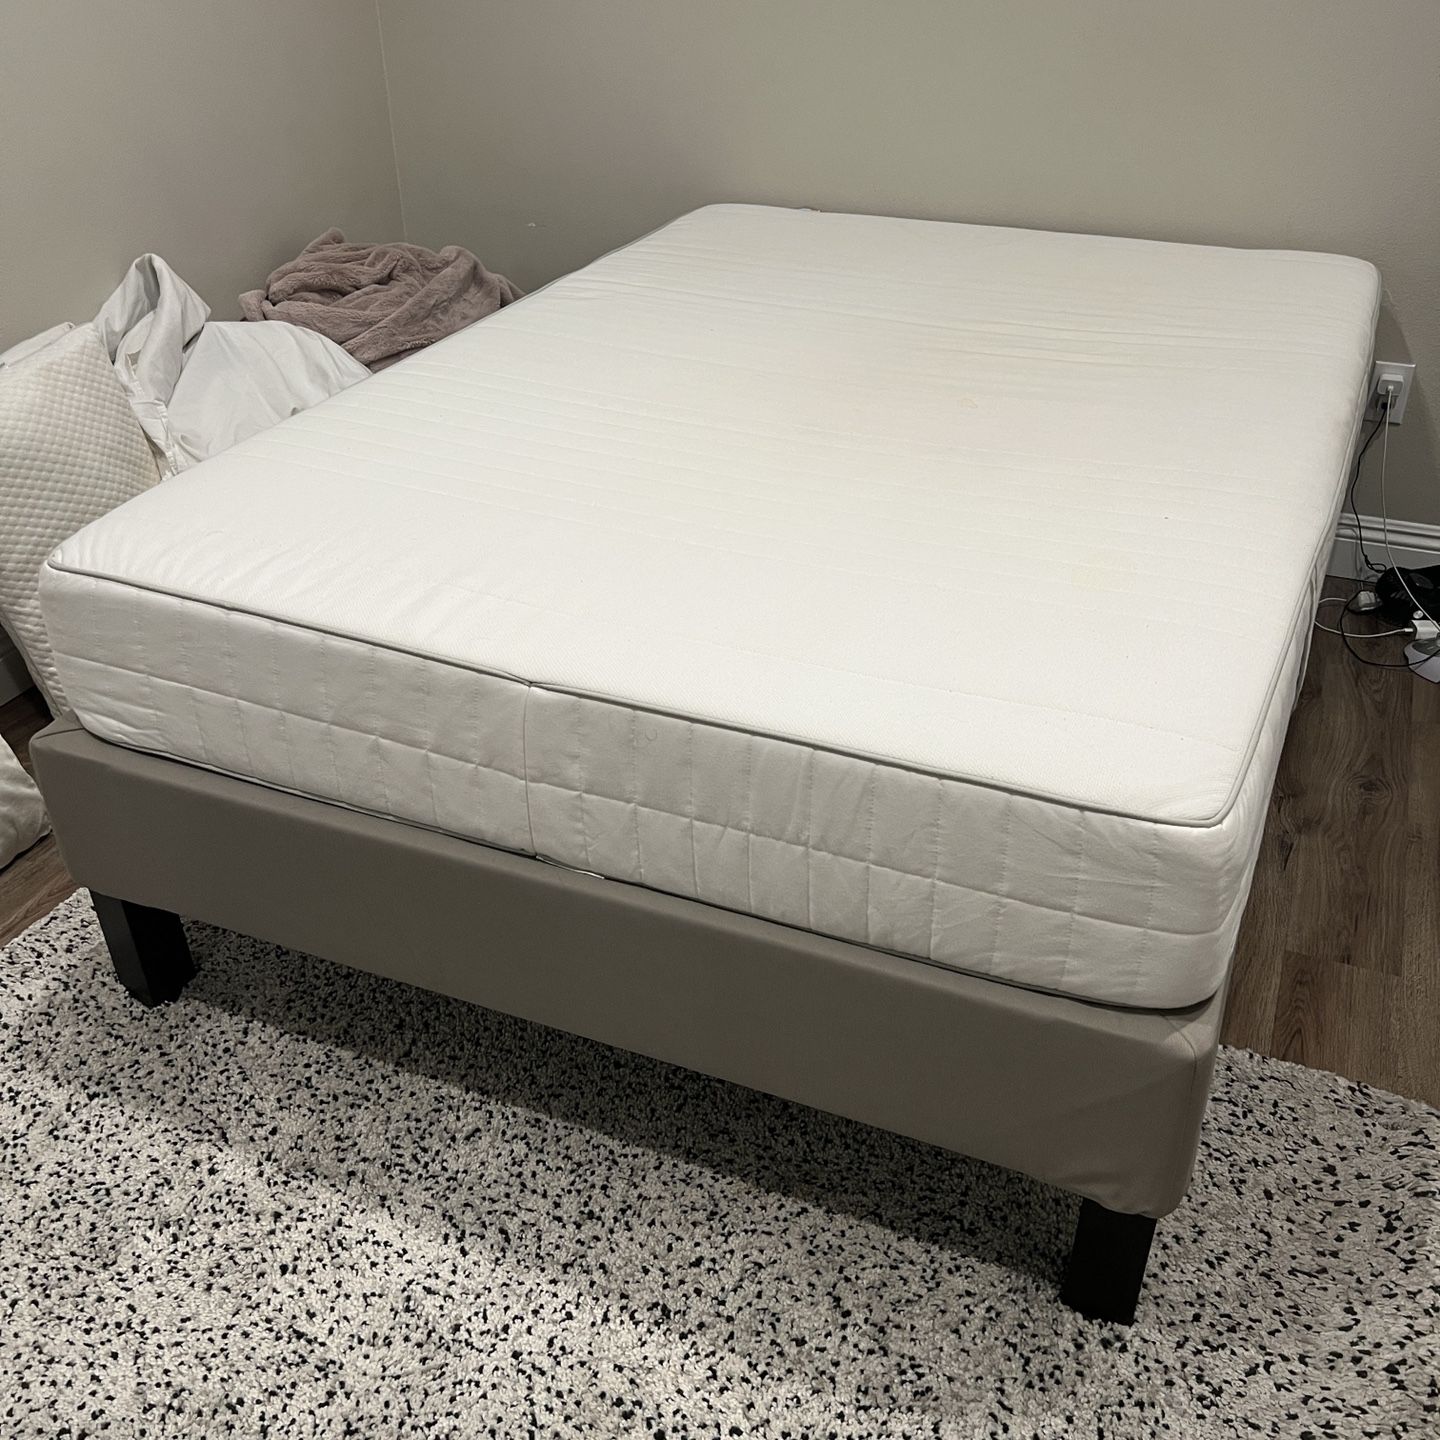 Full Bed And Mattress